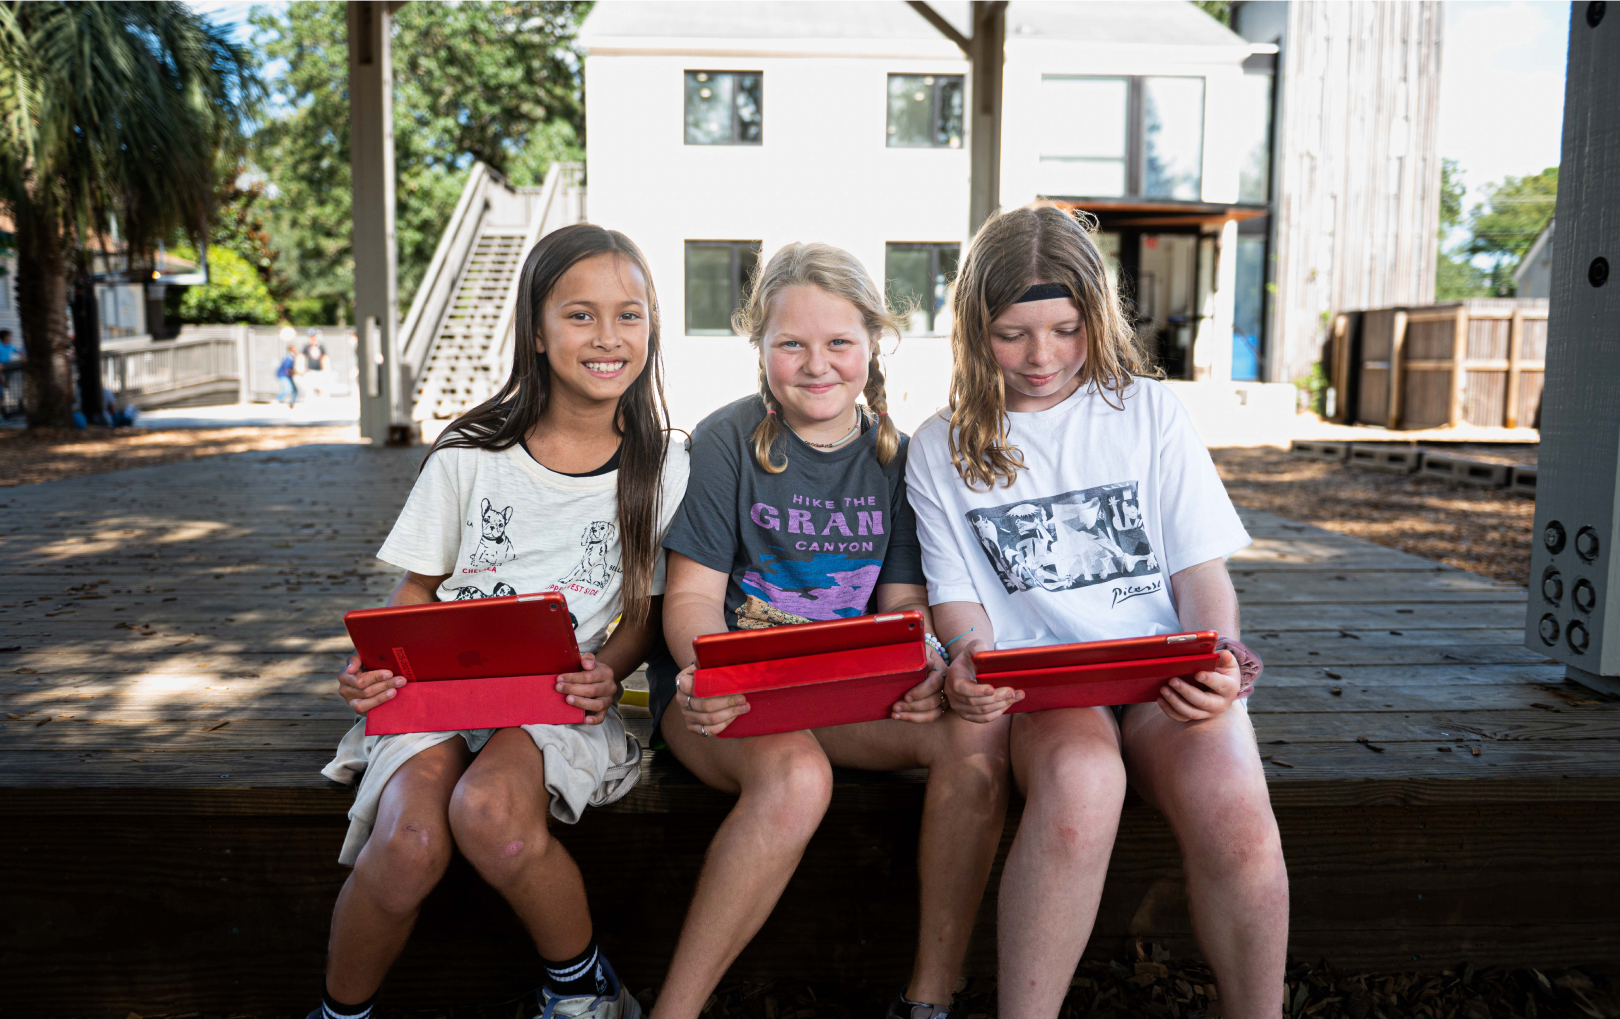 3 girls with red tablets sitting in gazebo